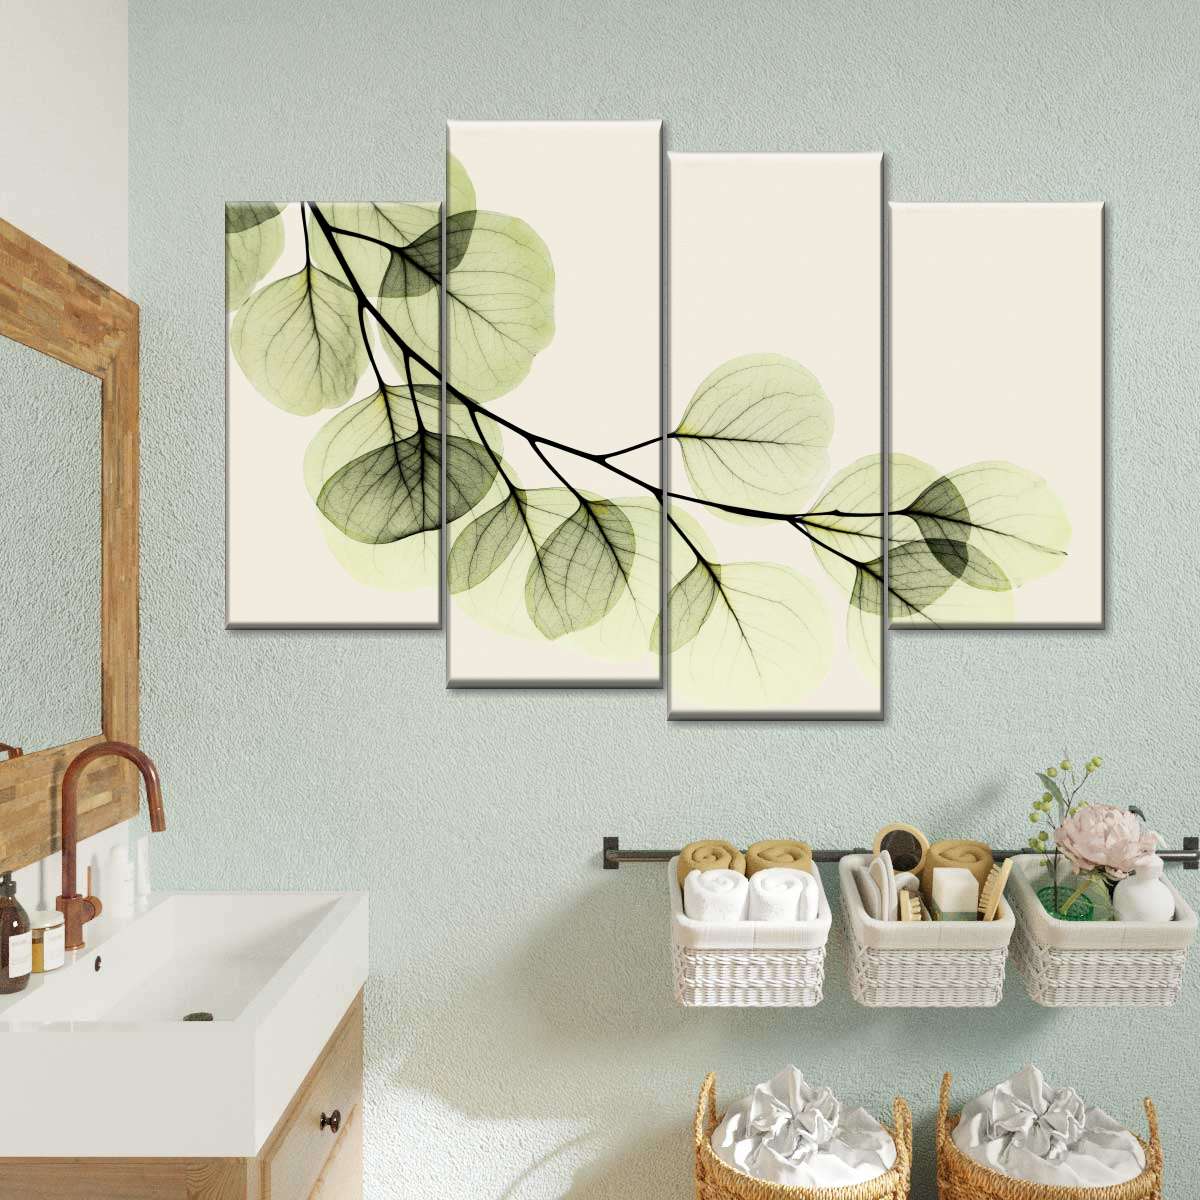 boost your bathroom with wall decor